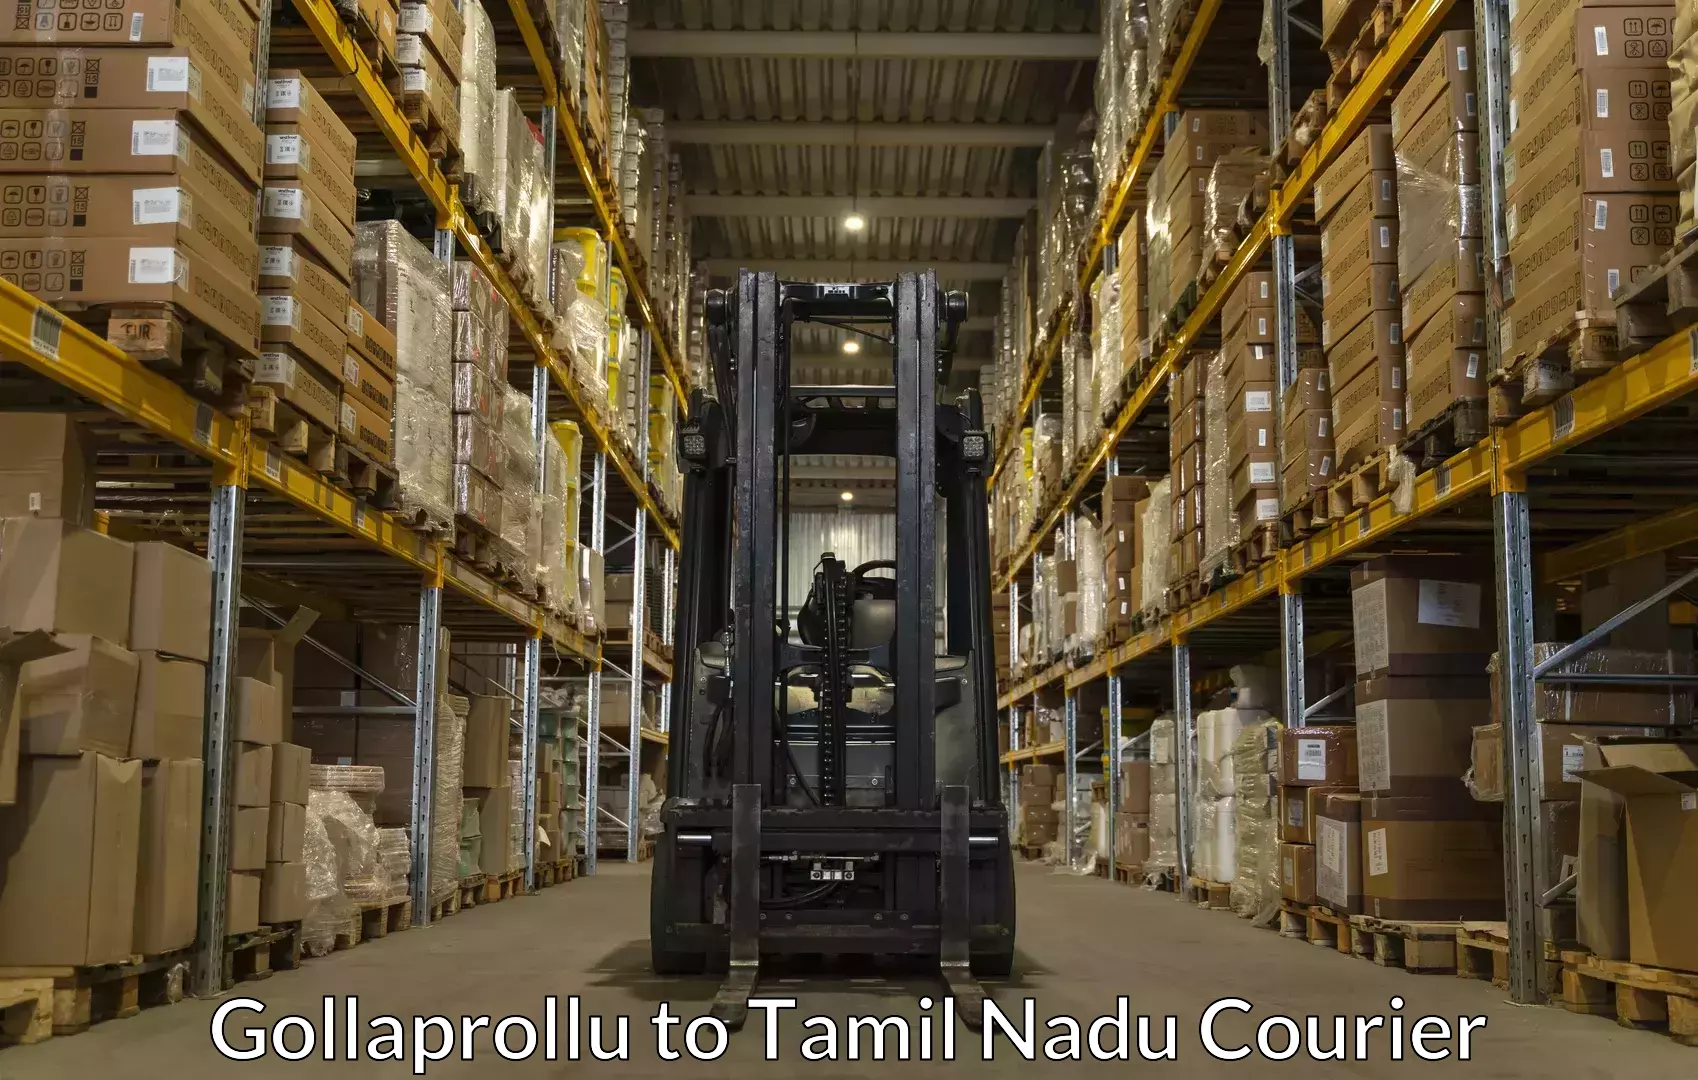 Moving and handling services Gollaprollu to Chennai Port